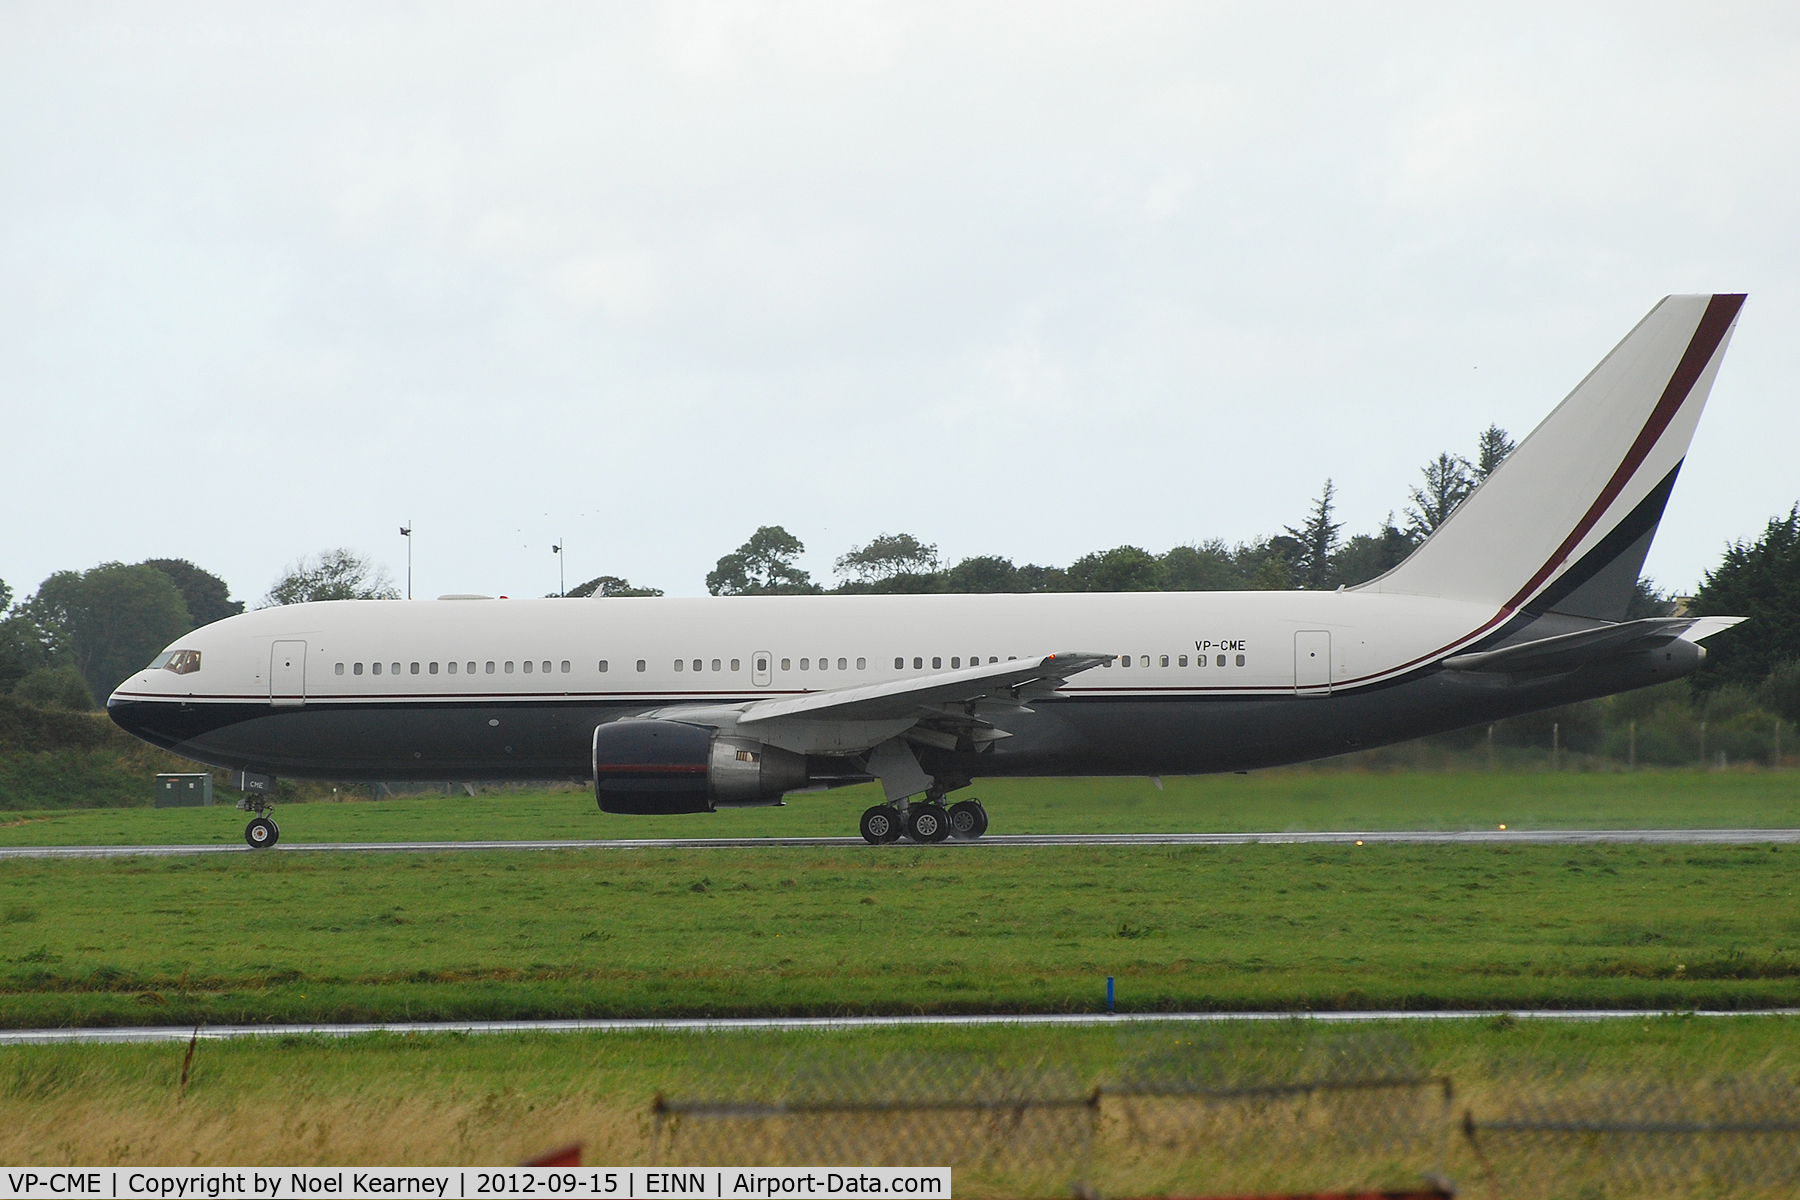 VP-CME, 1982 Boeing 767-231 C/N 22567, Seen departing off Rwy 24 at Shannon after maintenance.